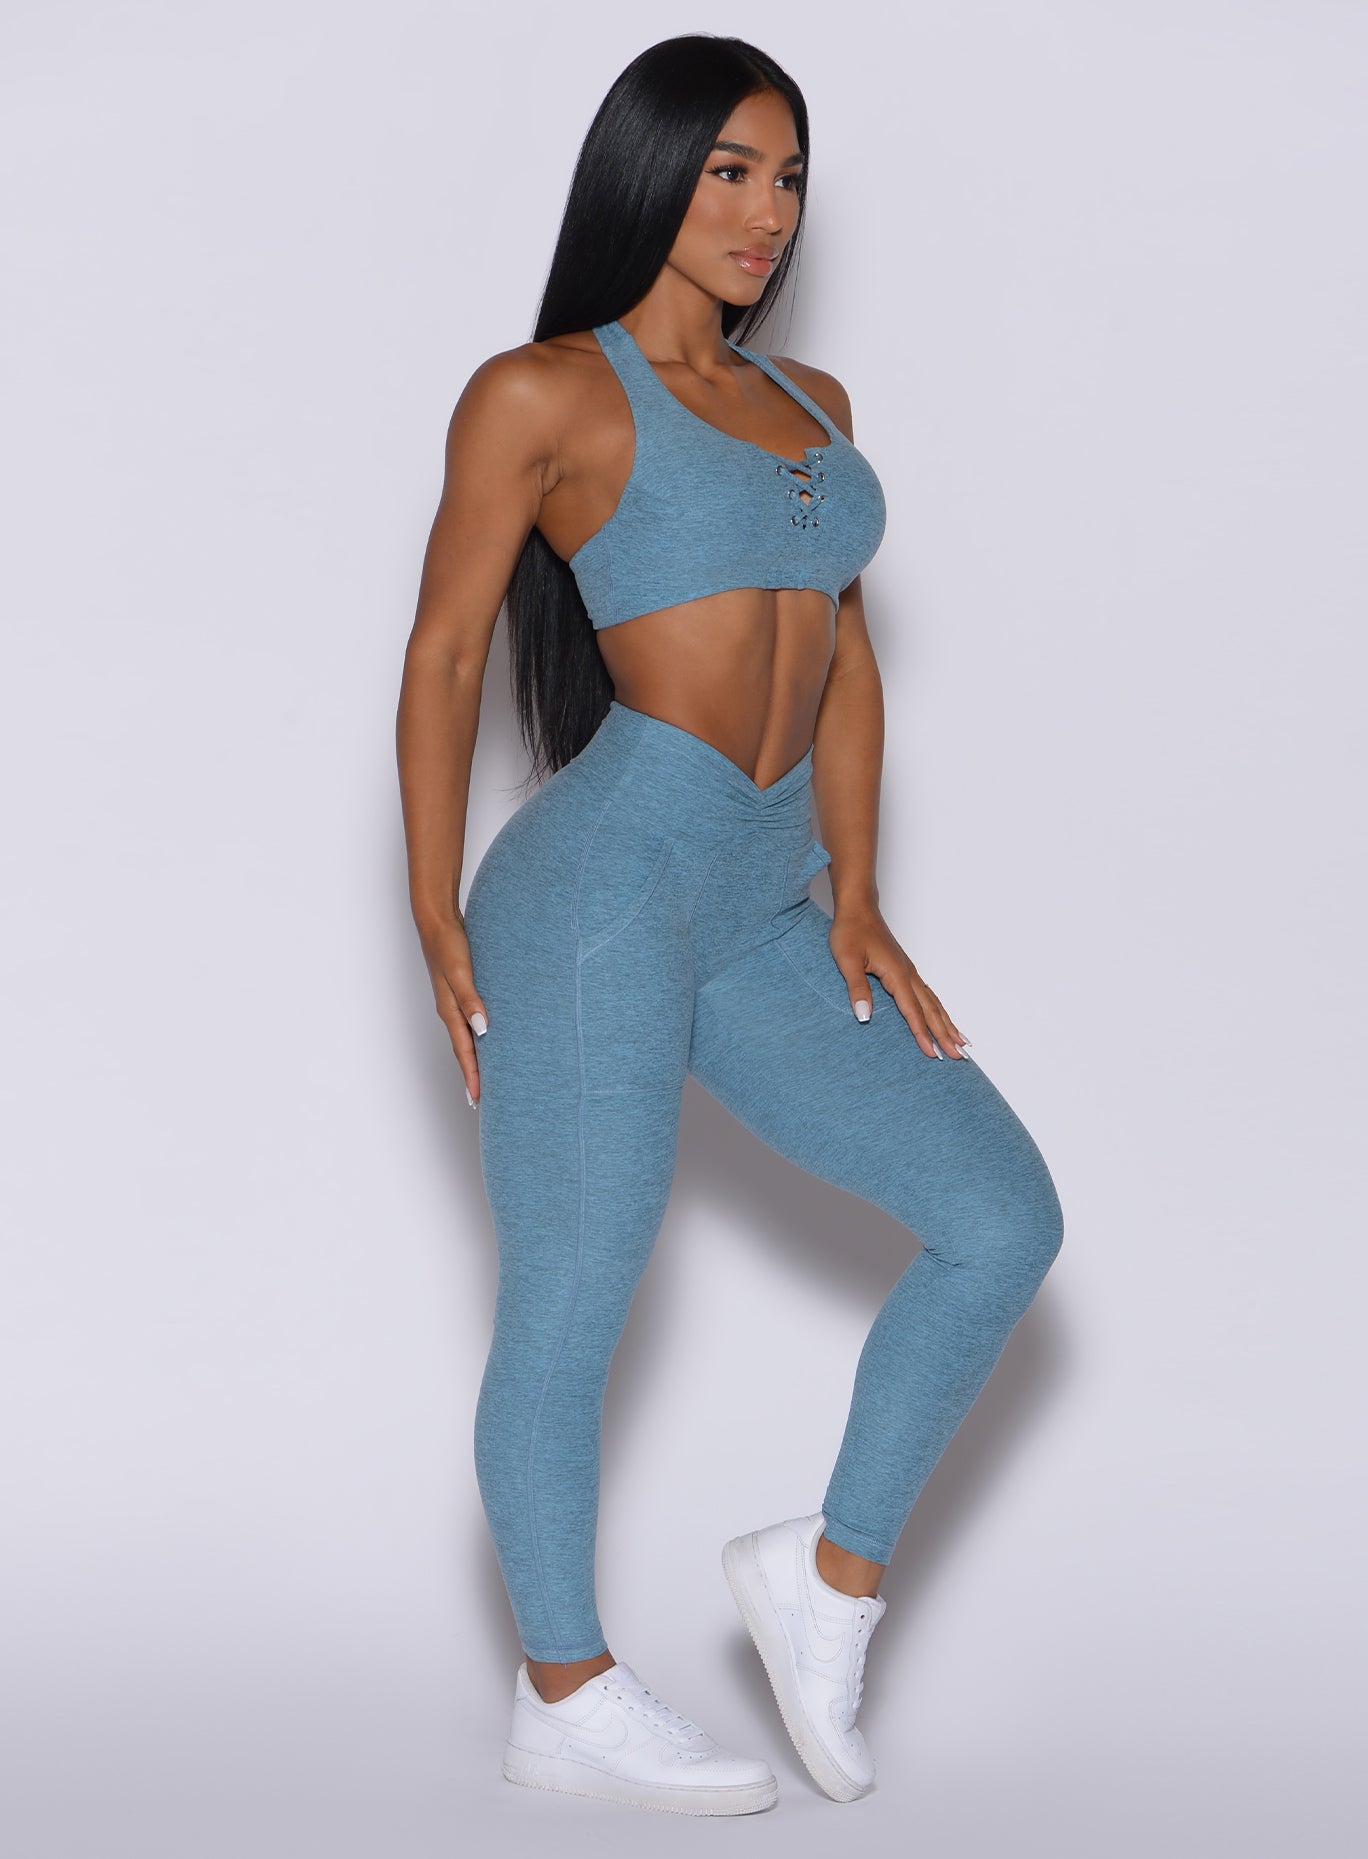 Right side profile view of a model angled to her right wearing our V scrunch leggings in baby blue color and a matching bra 